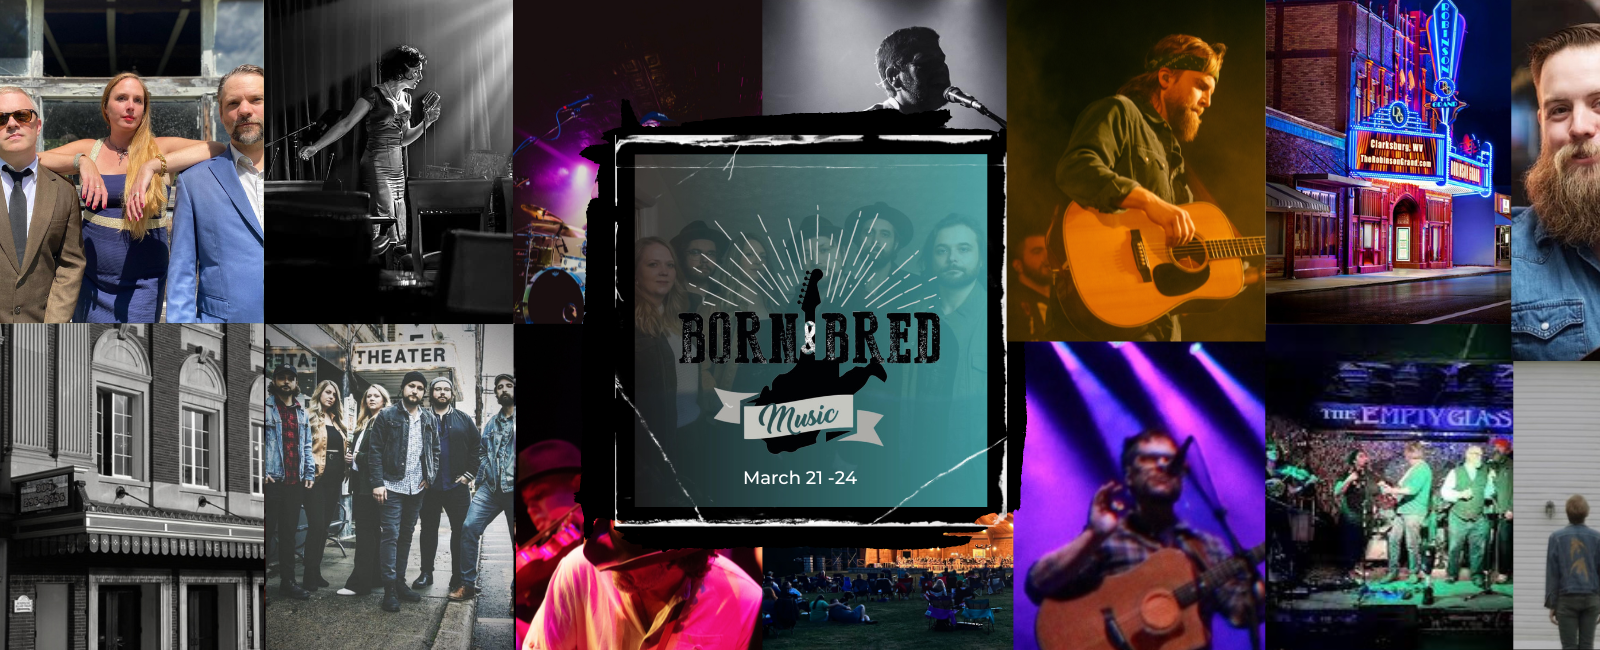 This First Weekend Of Spring Is Full Of Opportunities To Support Local Venues And Music!